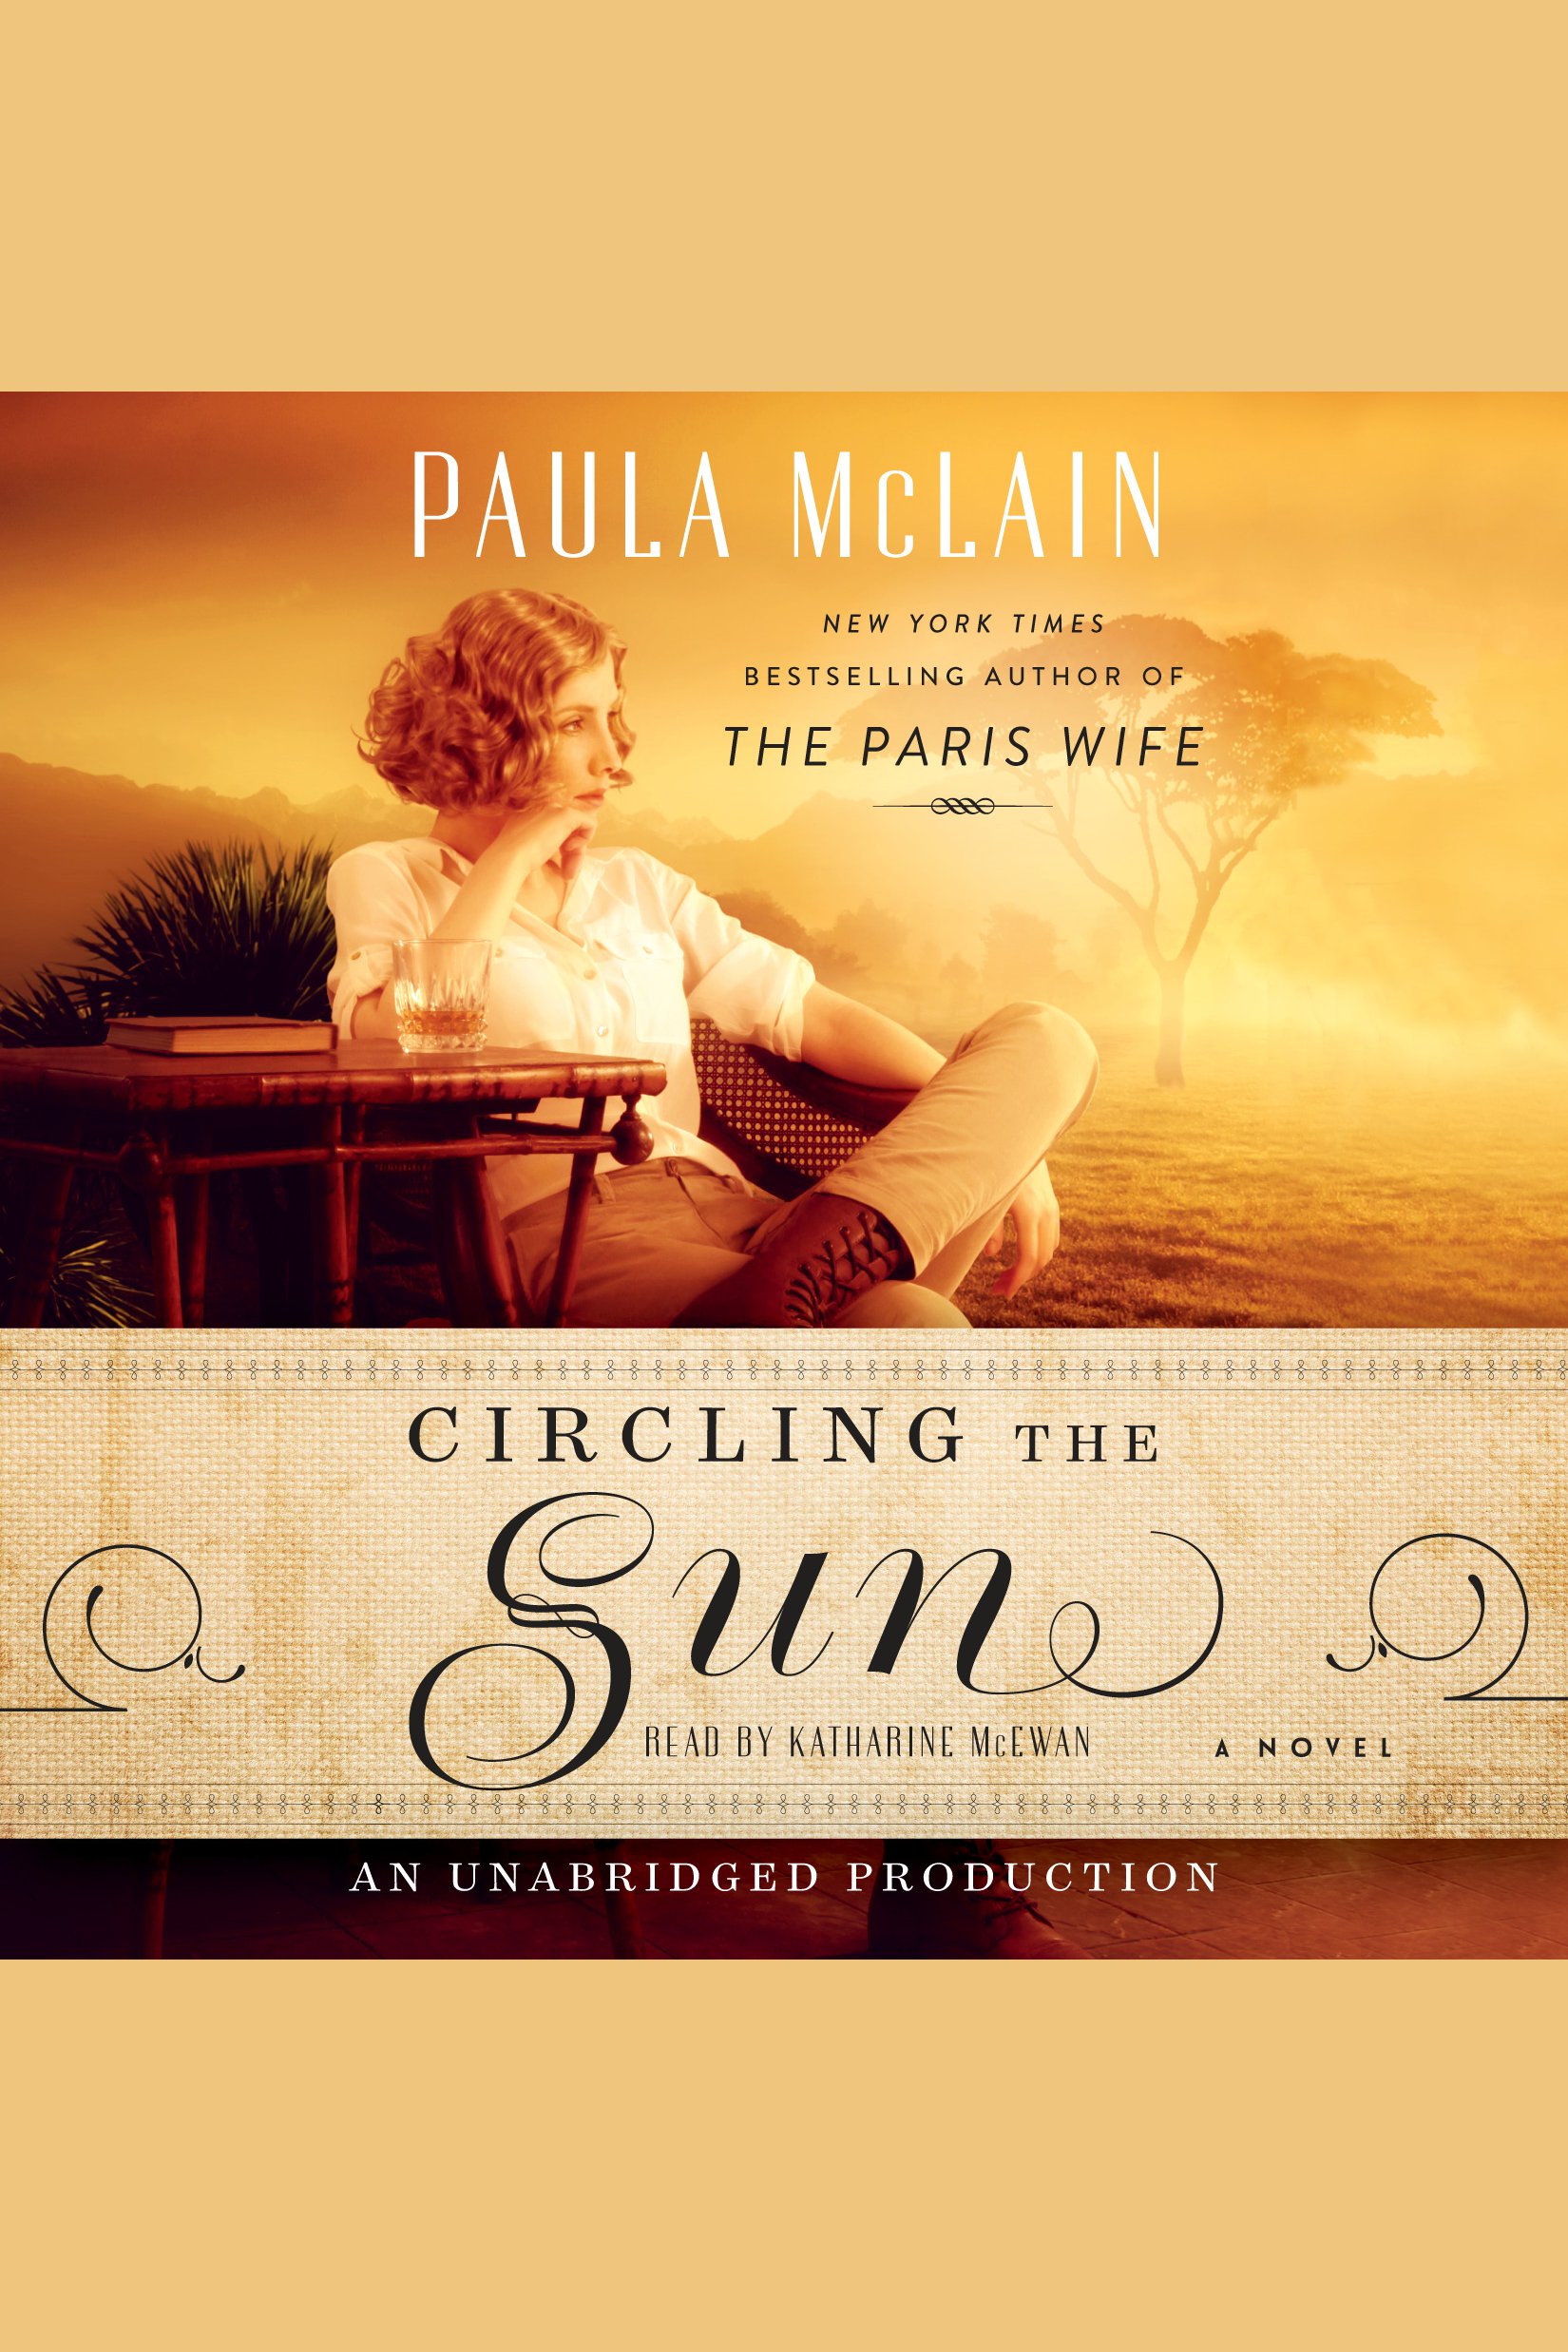 Circling the sun cover image